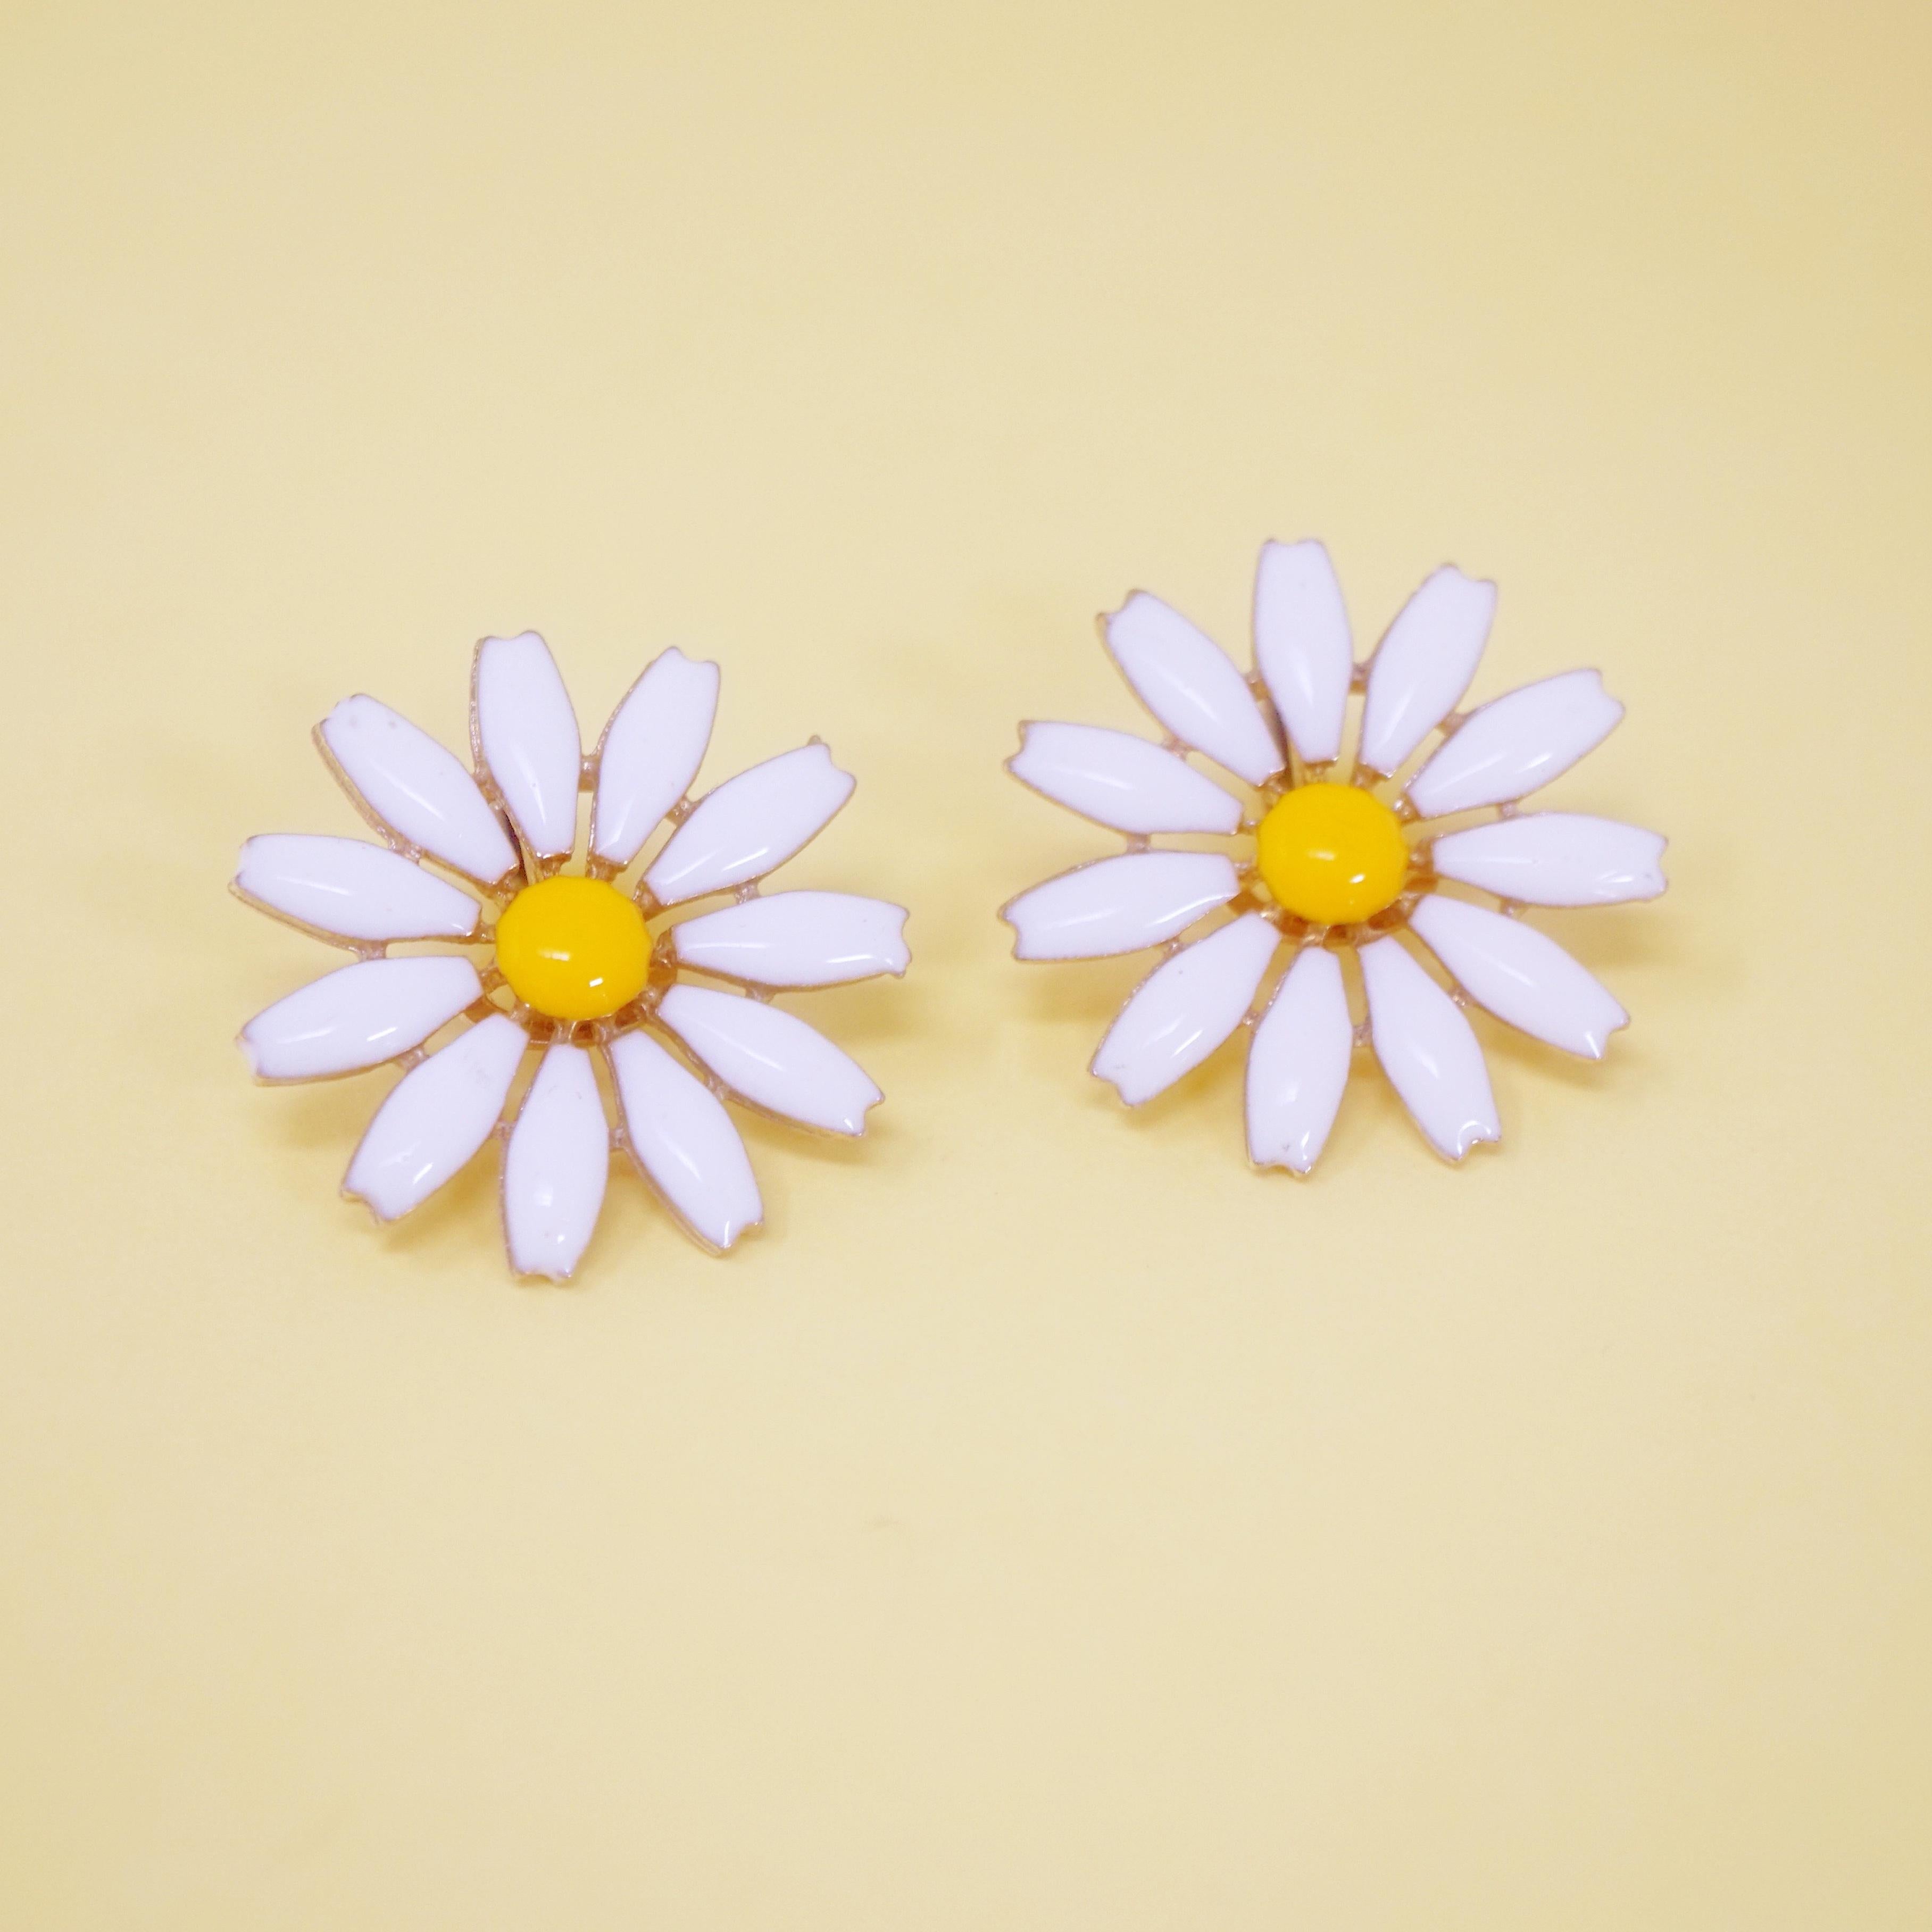 These vintage gold tone and enamel daisy clip-on earrings are an adorable accessory for Spring/Summer!  These sweet earrings are a perfect way to get in touch with your inner flower child and channel a trend from the 1960s. A wonderful addition to